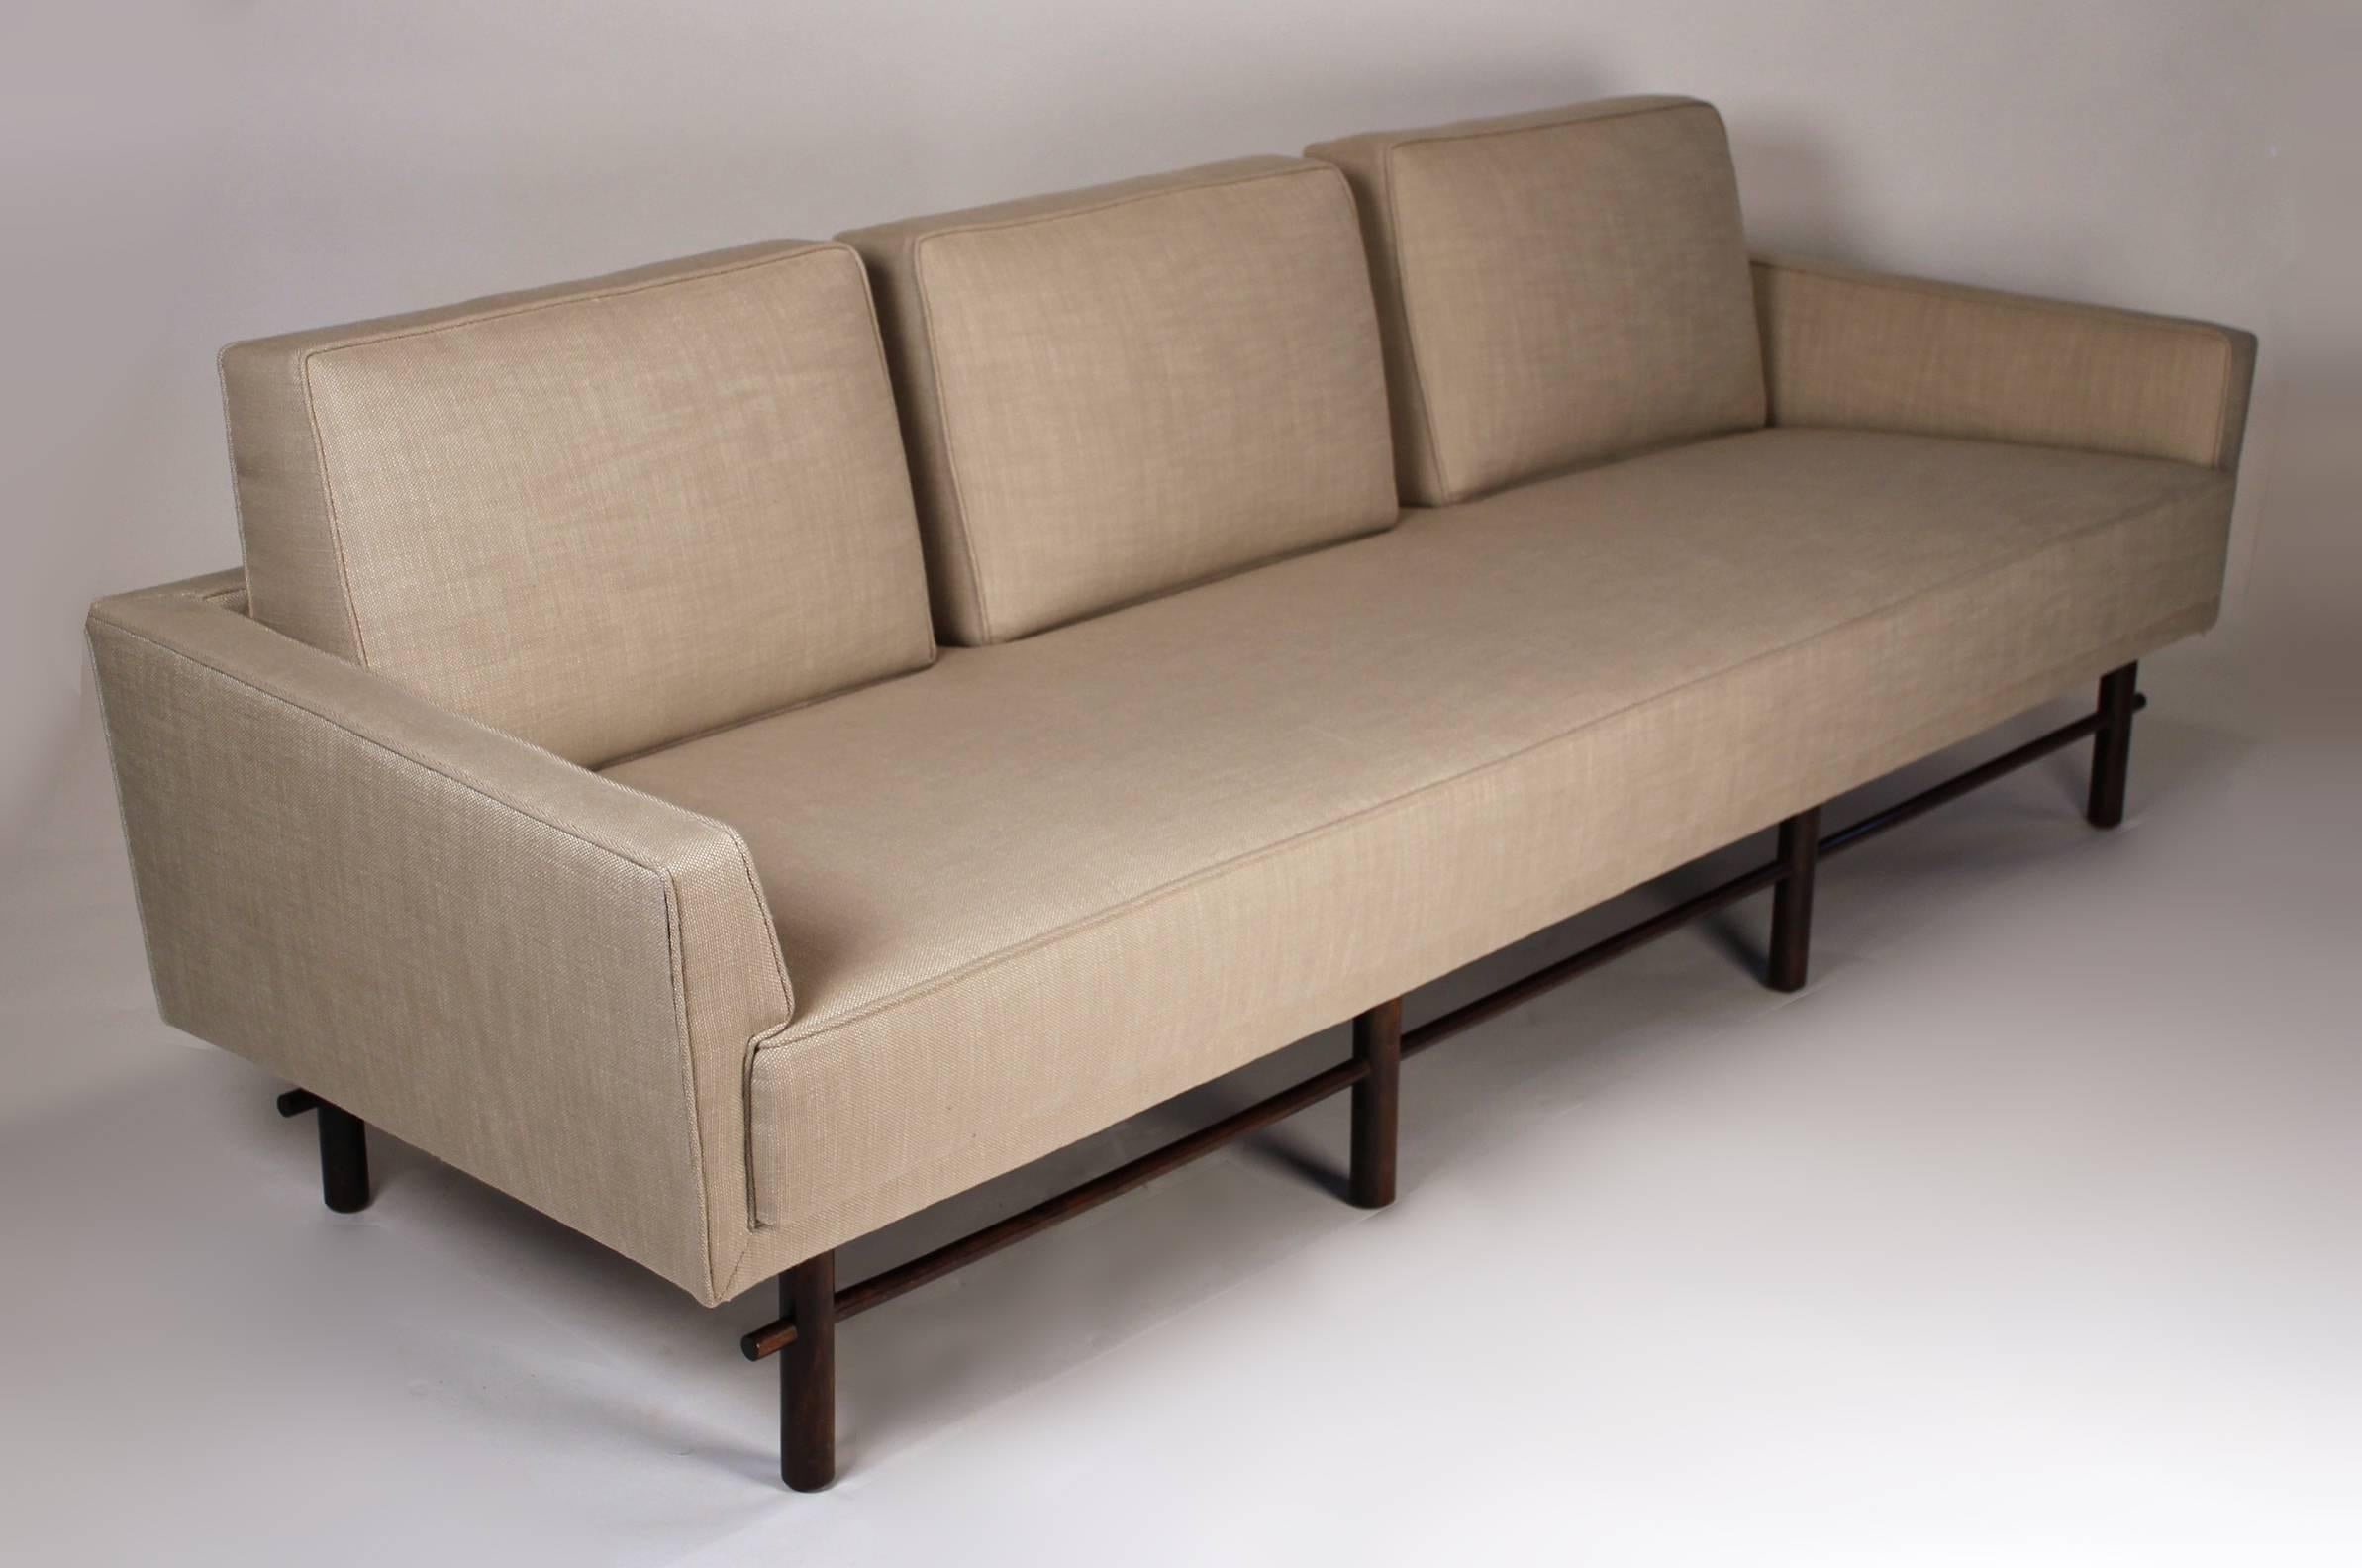 Early and scarcely seen three-seat sofa with fixed back cushions and flared tapering arms designed by Michael Taylor for Baker. A very comfortable sofa with incredibly clean lines. Reupholstered in a Perennial's tweed textile. All of the seat